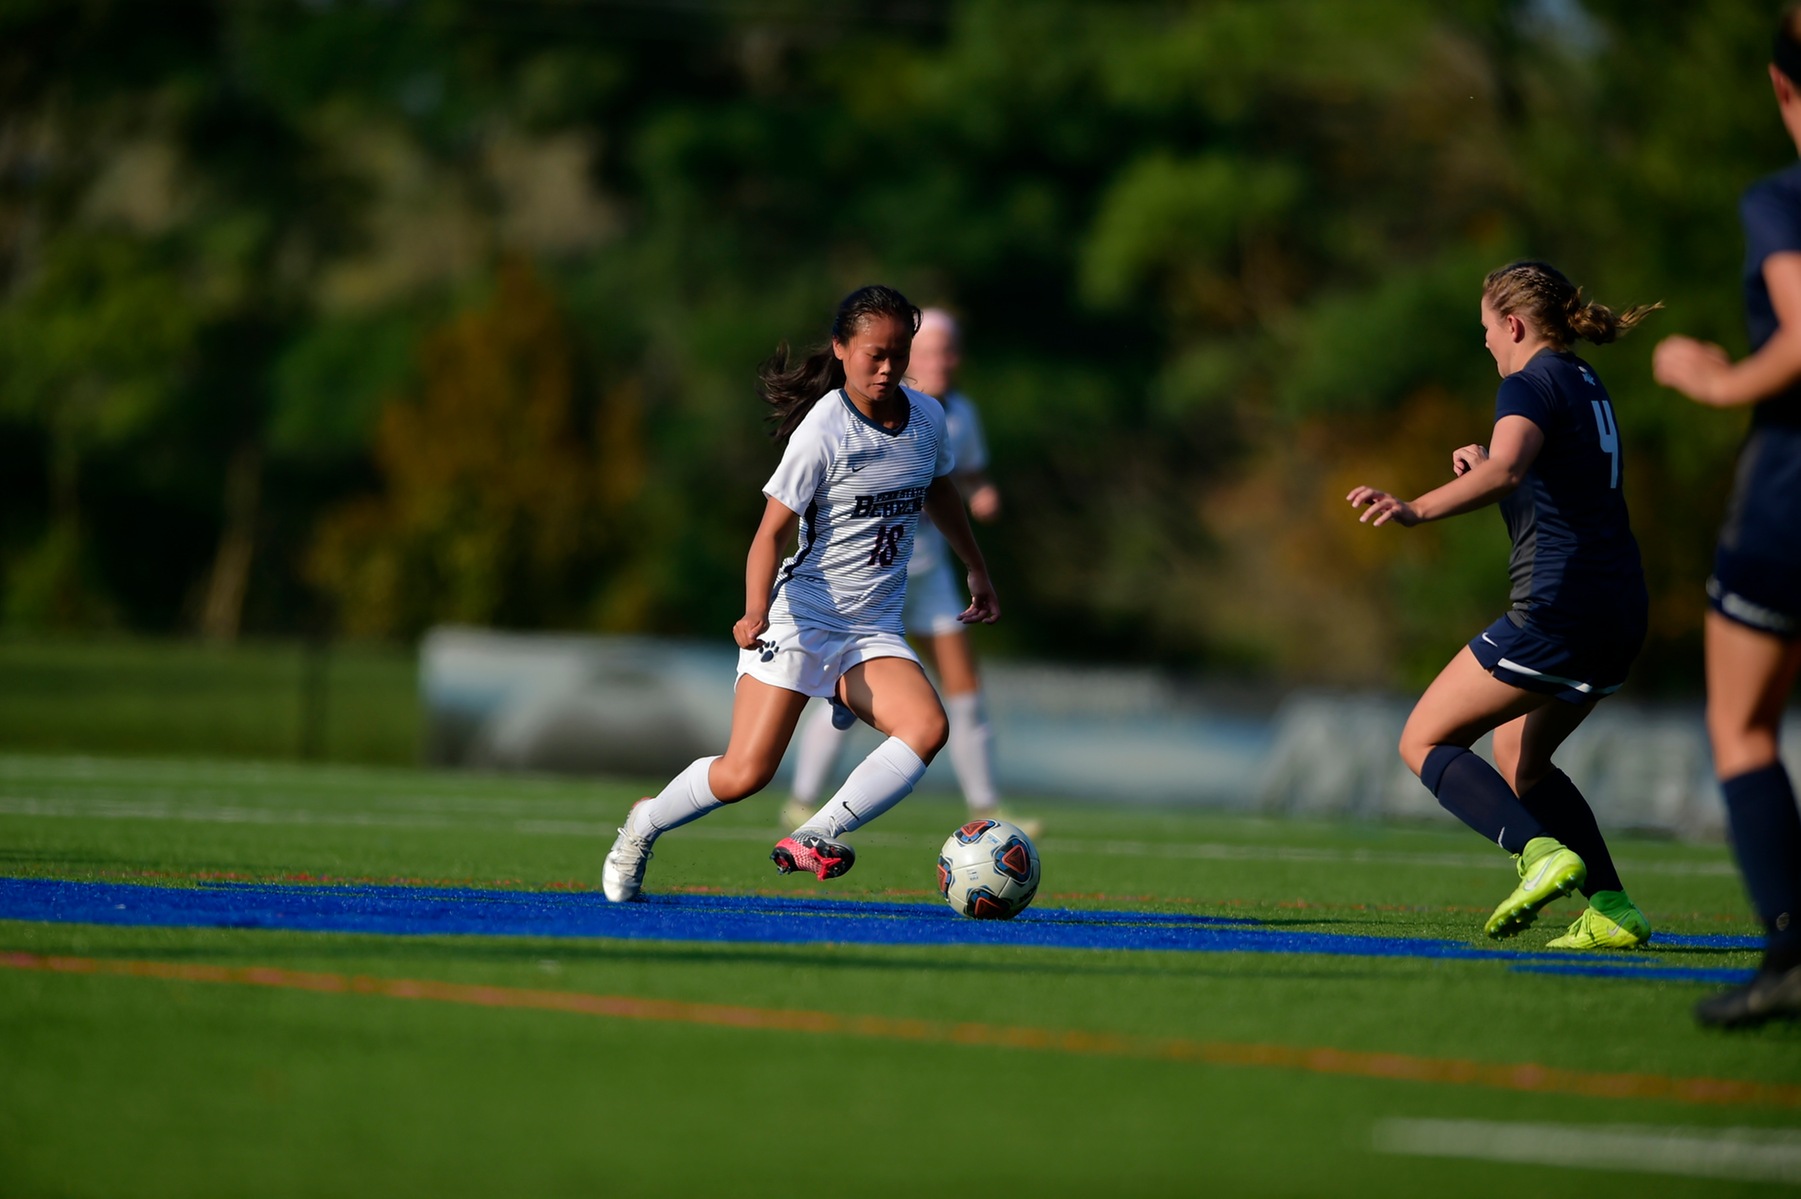 Lions Take Down Altoona, 2-0 in AMCC Game of the Week